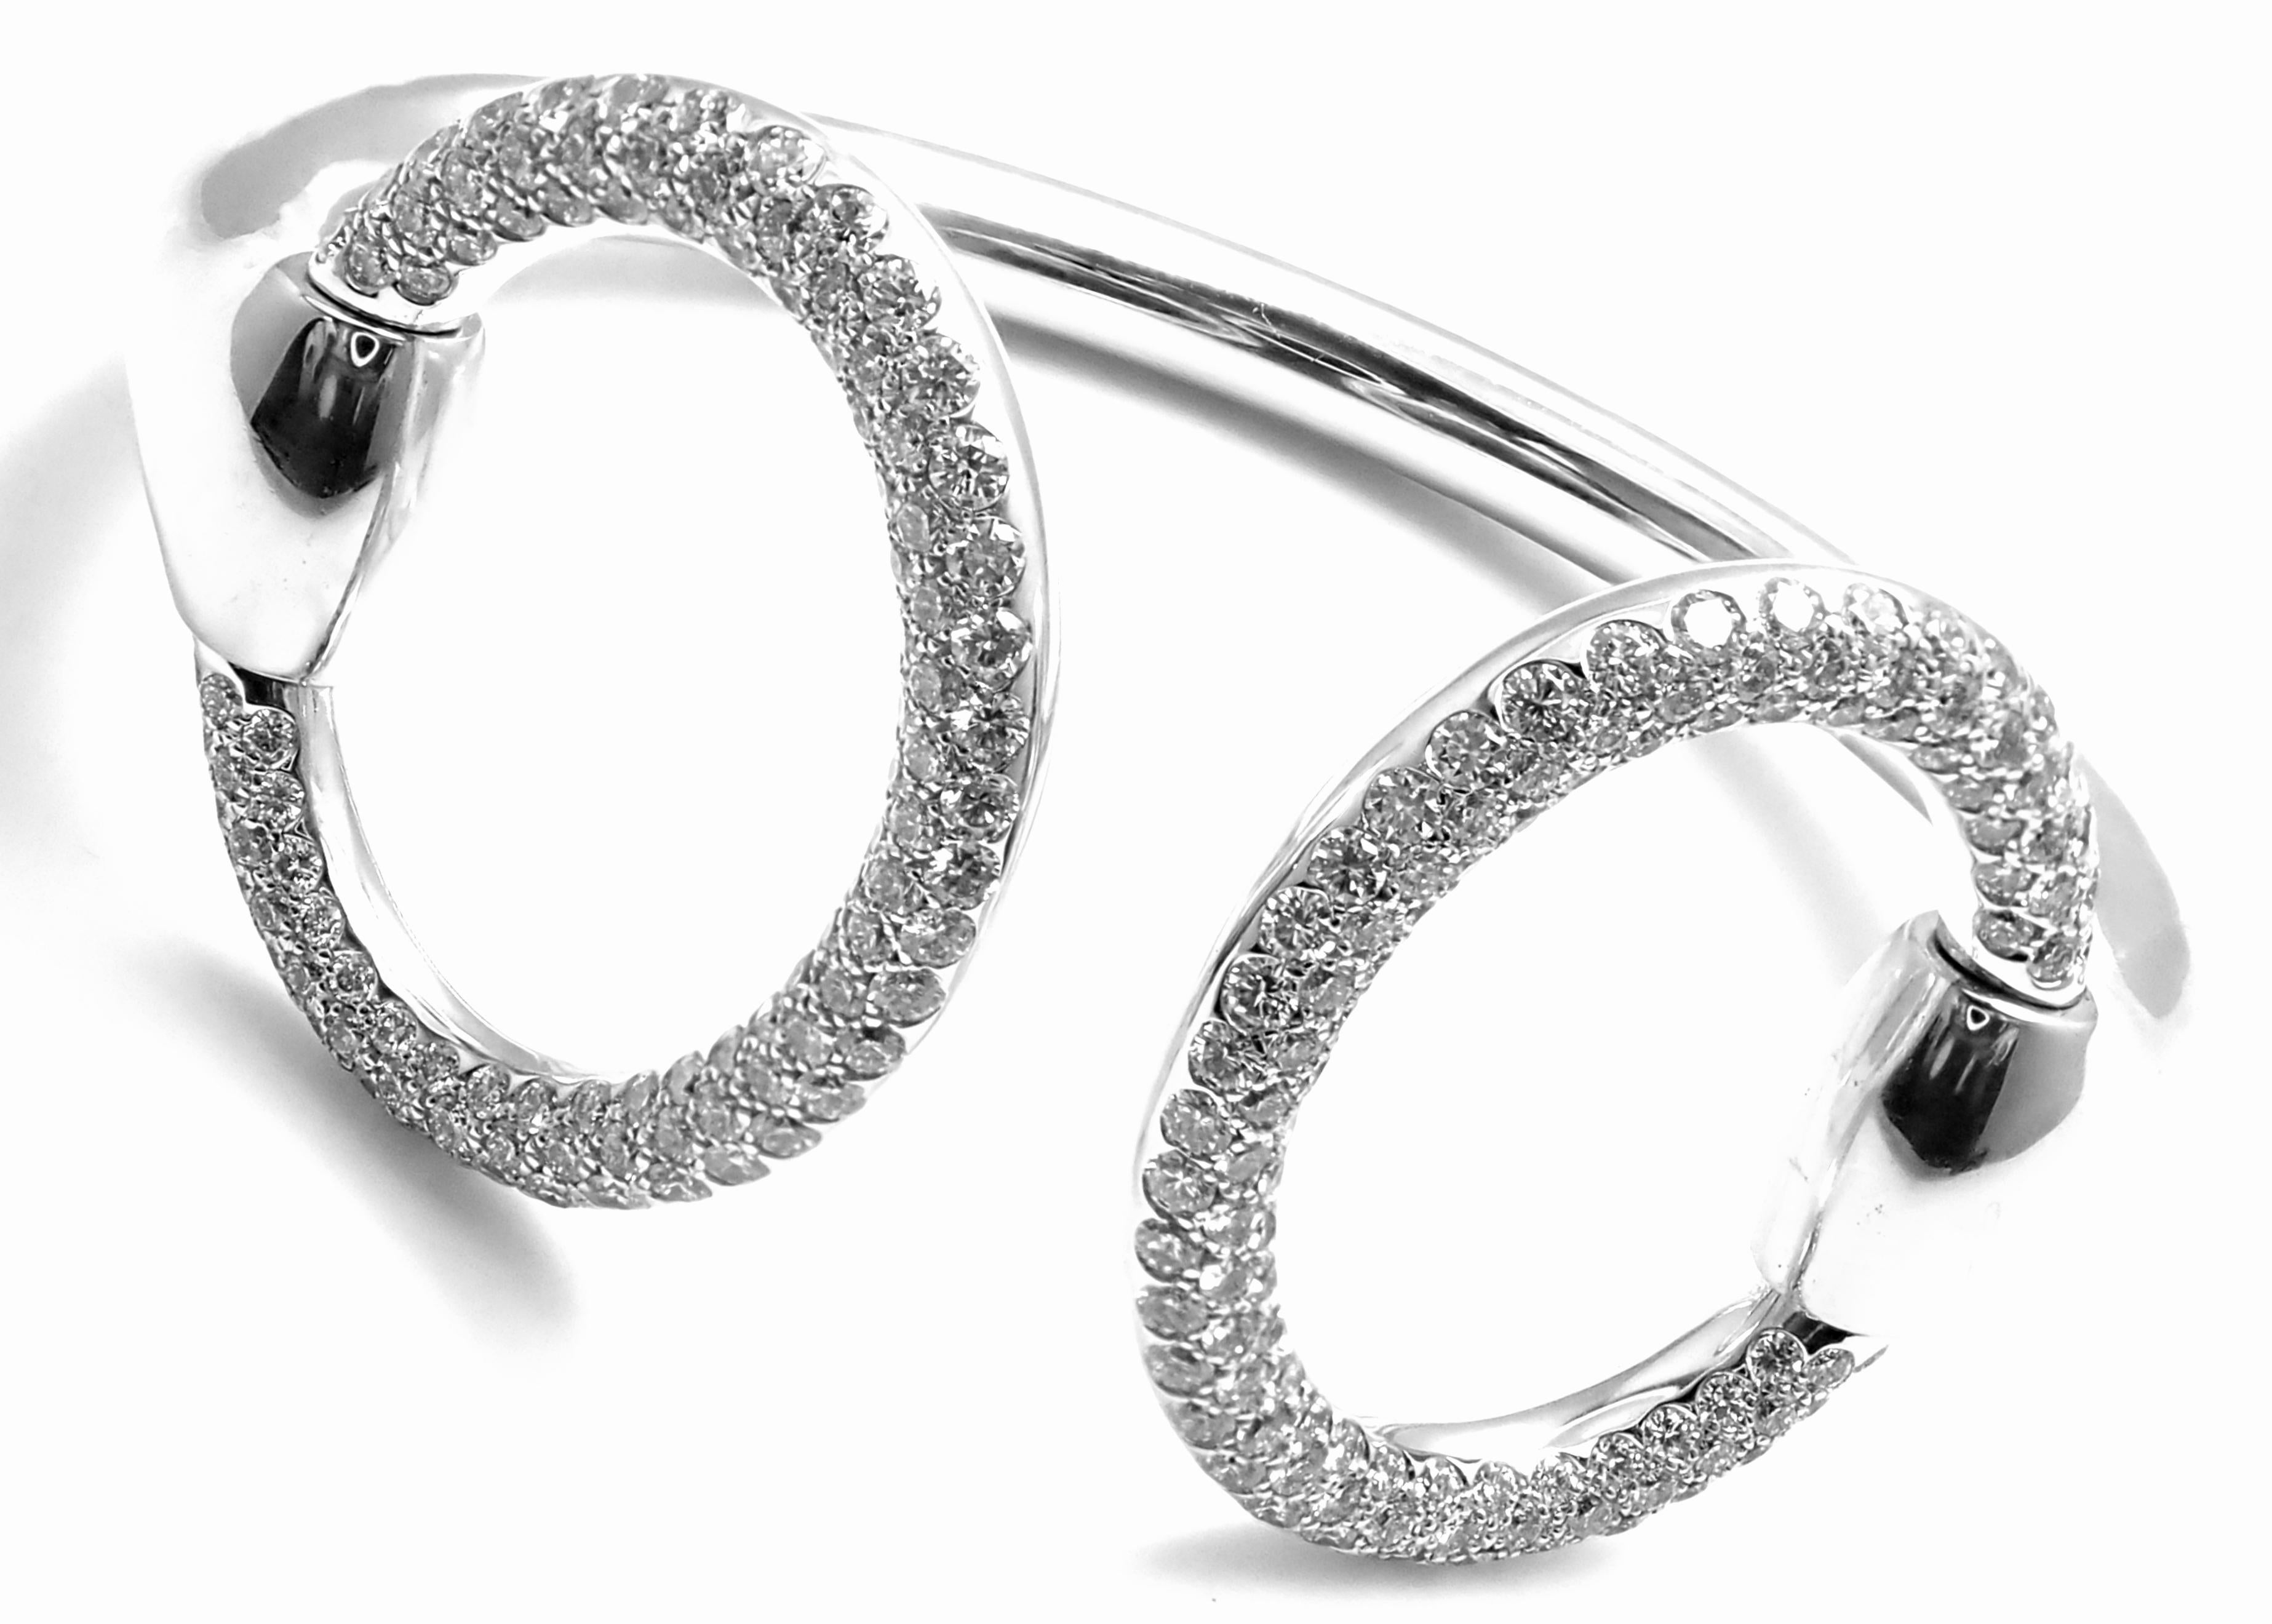 Stunning 18k White Gold Diamond Horsebit Nausicaa Cuff Bangle Bracelet by Hermes. 
With Round brilliant cut diamonds VVS1 clarity E color total weight approx. 4ct
Details: 
Length: 6.5